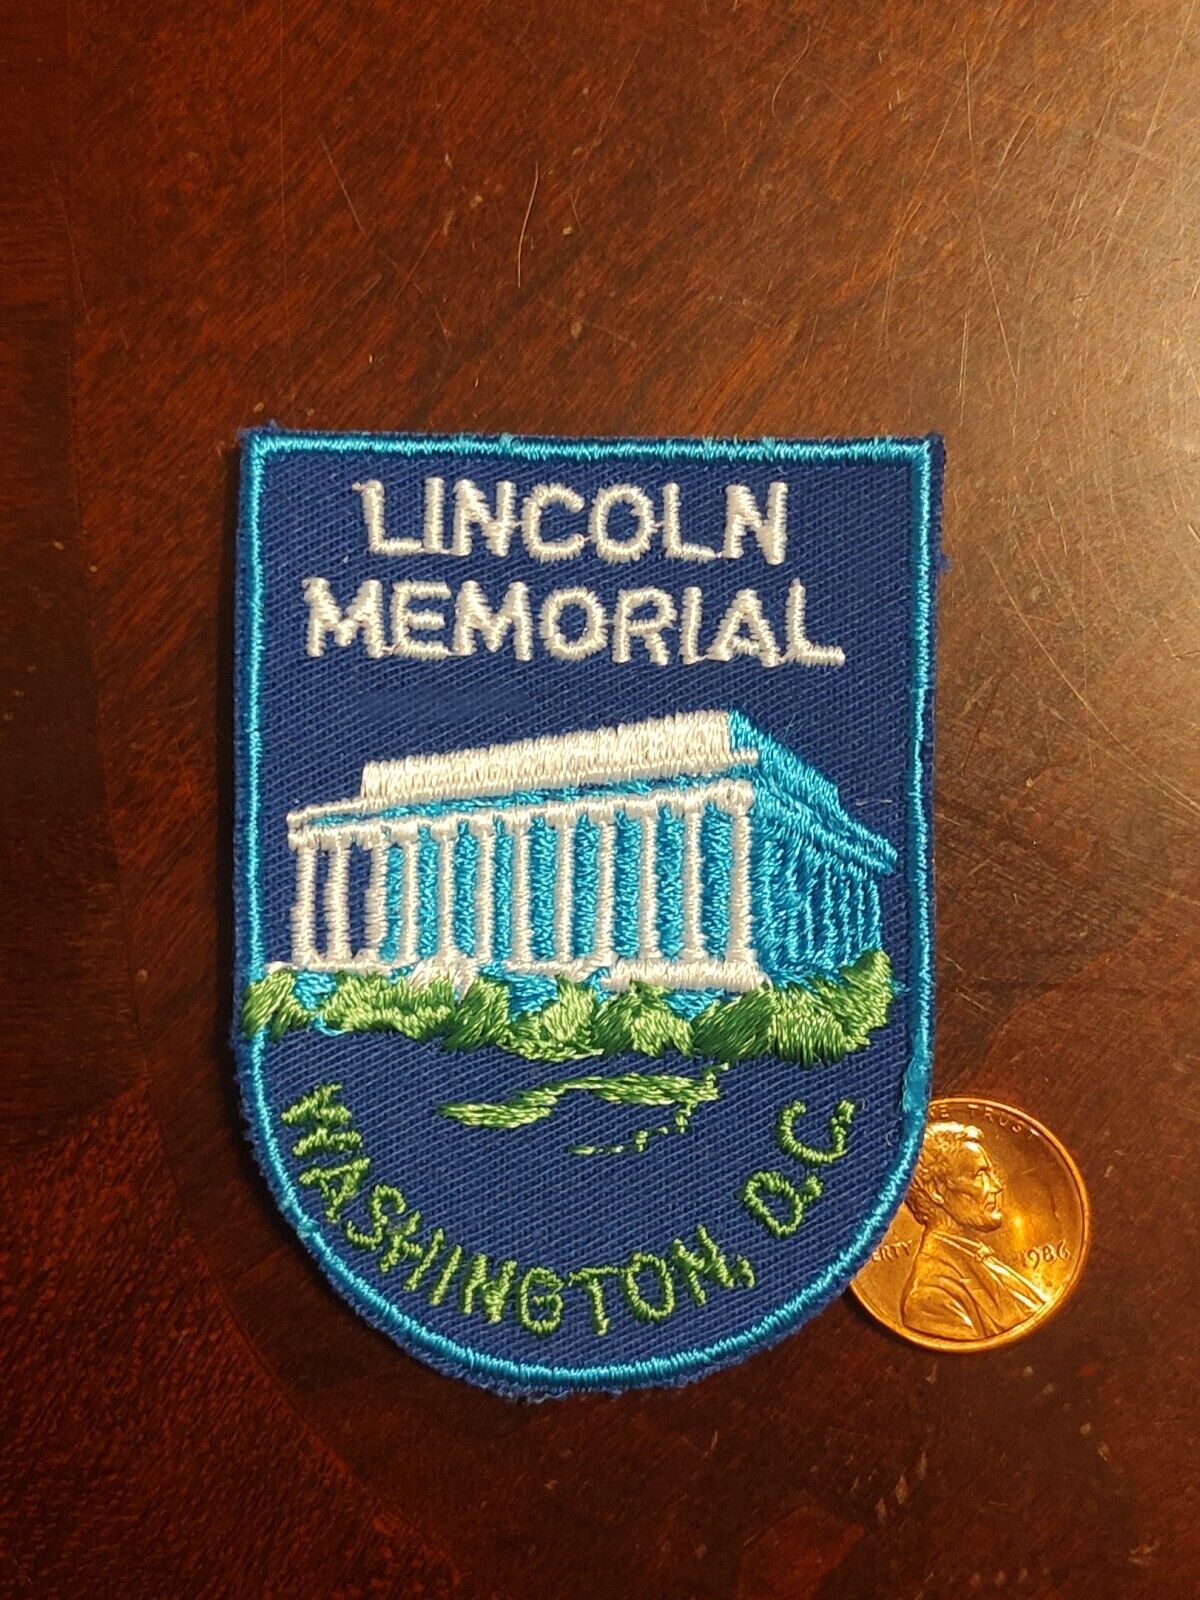 Vintage Voyager Lincoln Memorial Washington DC Embroidered Patch NEW Iron-On Sew